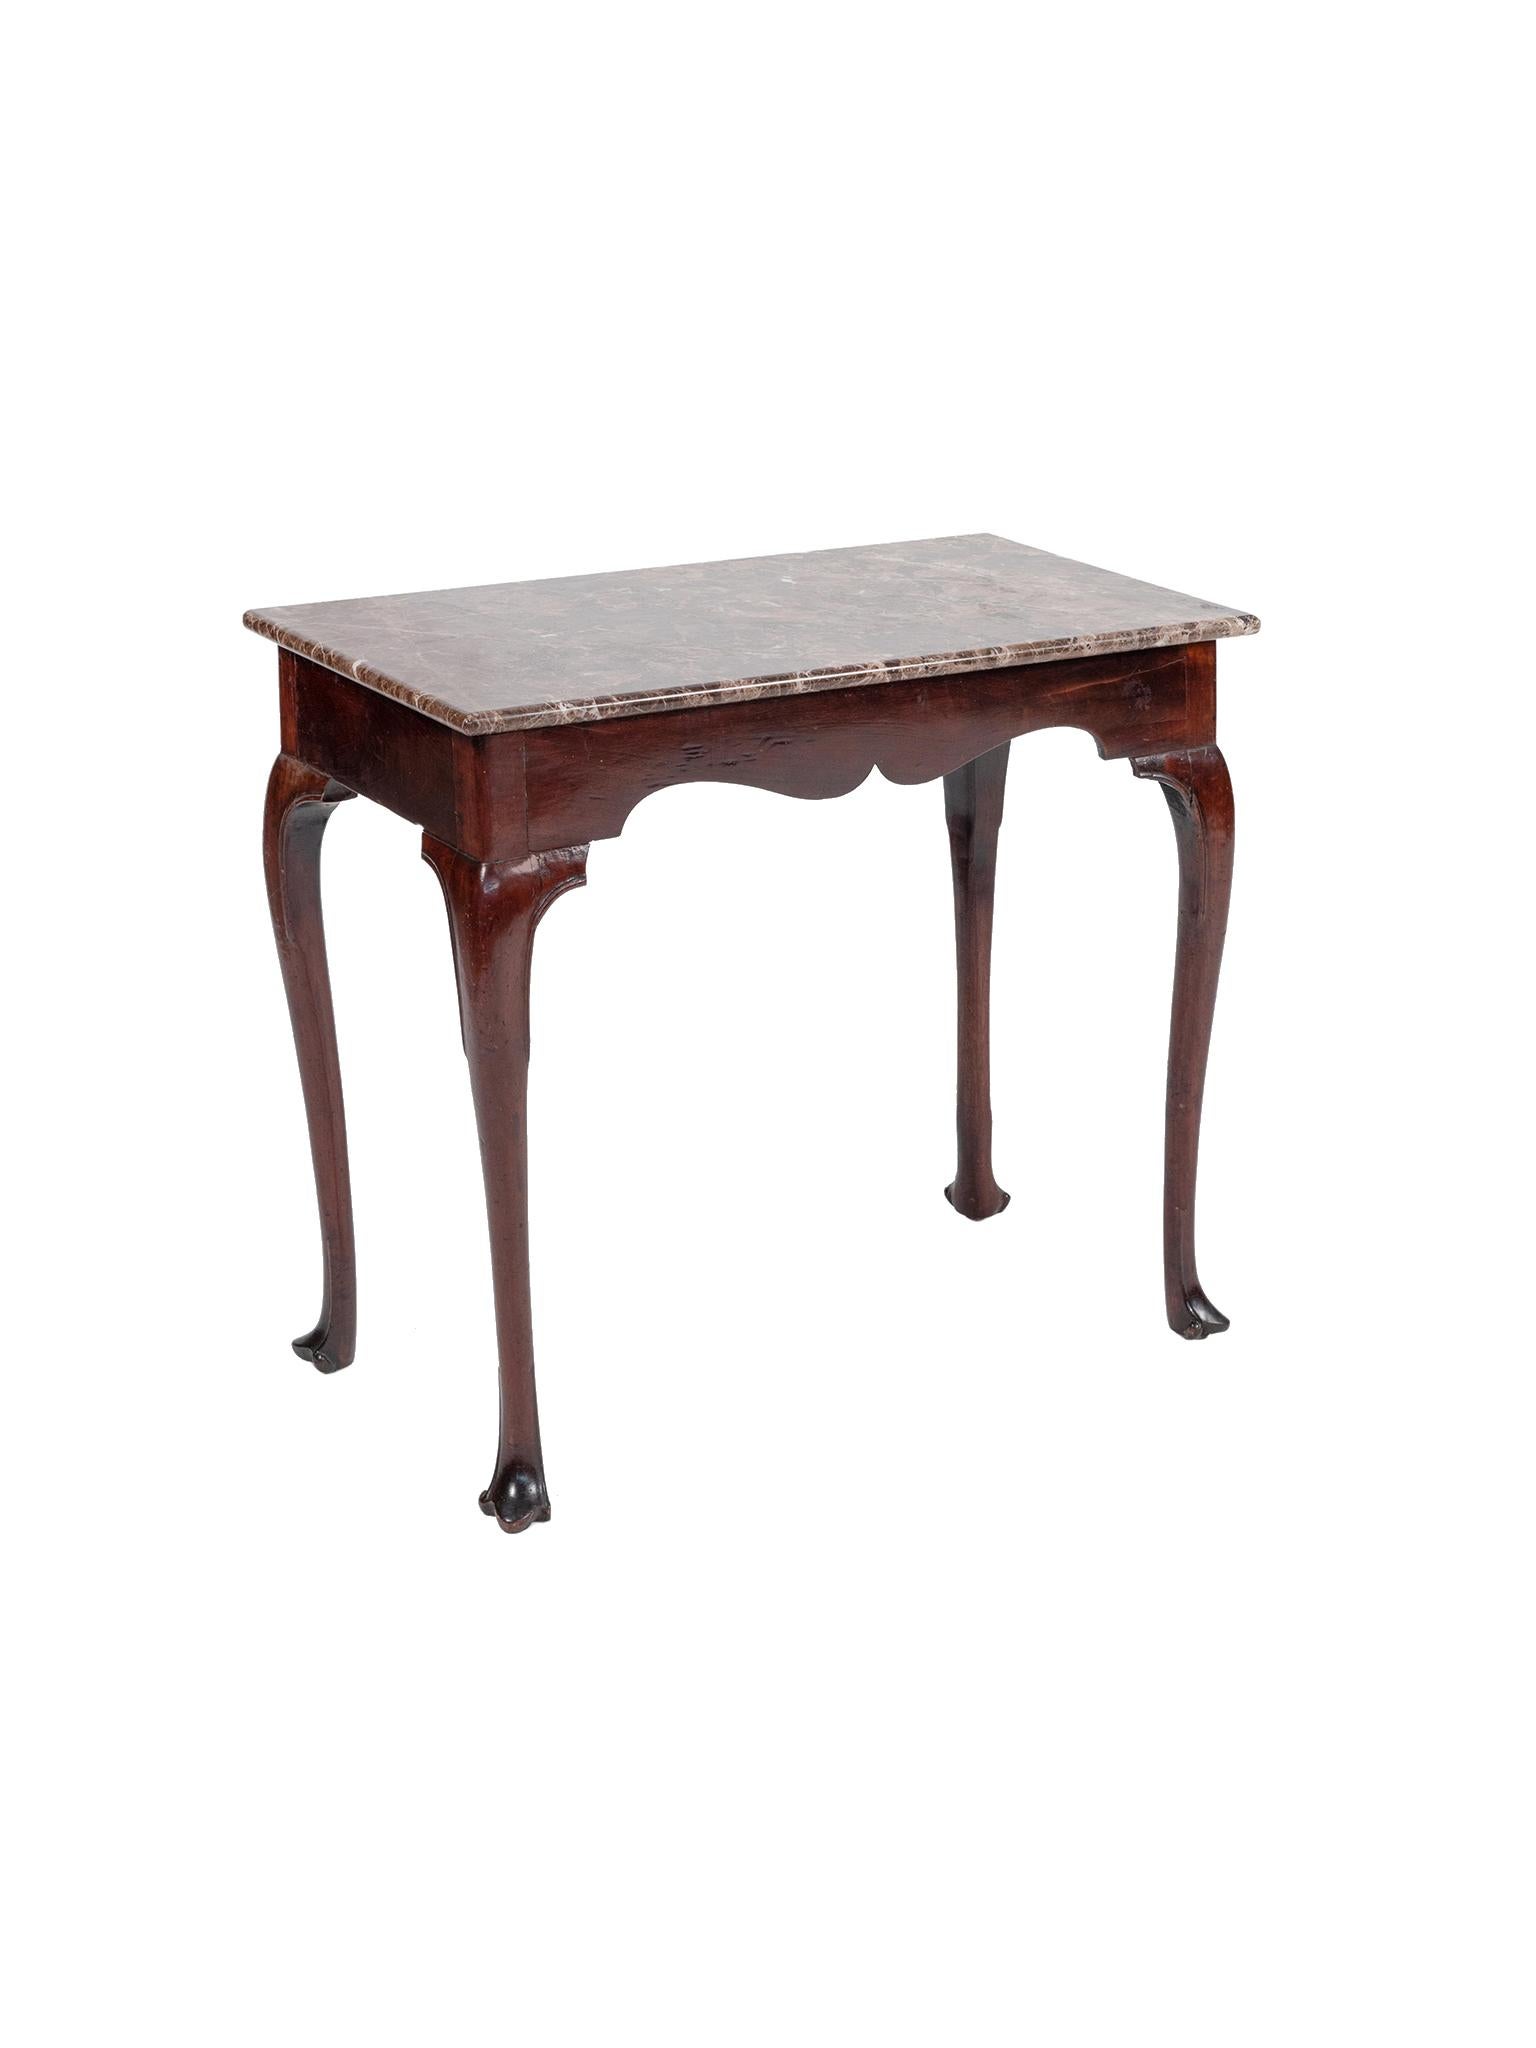 European 18th Century Irish Marble-Top Console Table For Sale